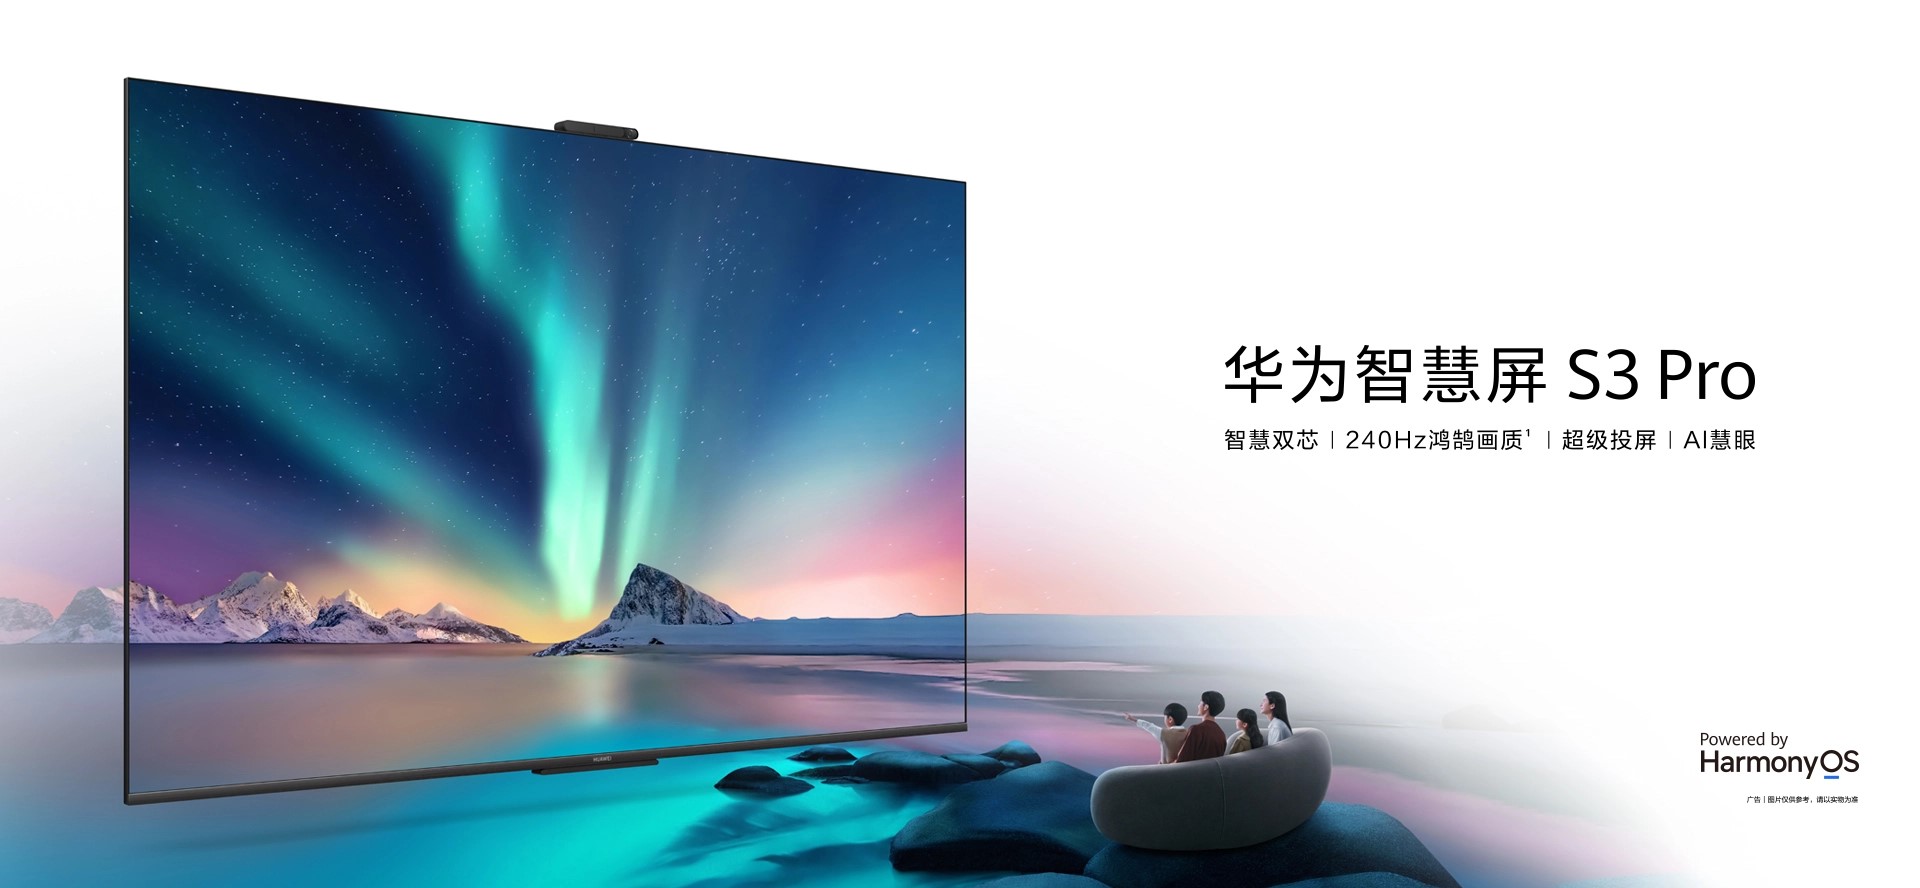 HUAWEI MateBook D14/D16 2023 with 13th Gen Intel Core Processors announced